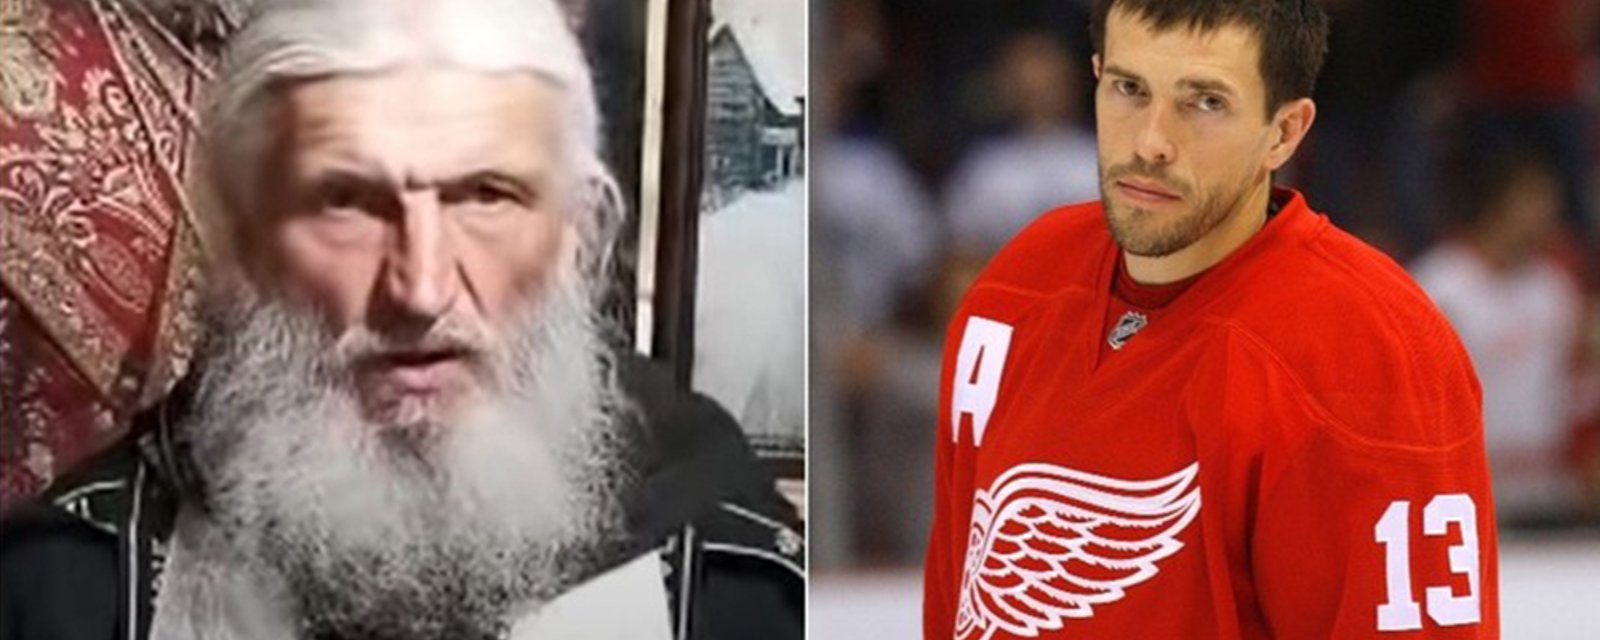 Pavel Datsyuk is reportedly “holed up at a monastery with priest who claims Covid is cover-up to microchip population”